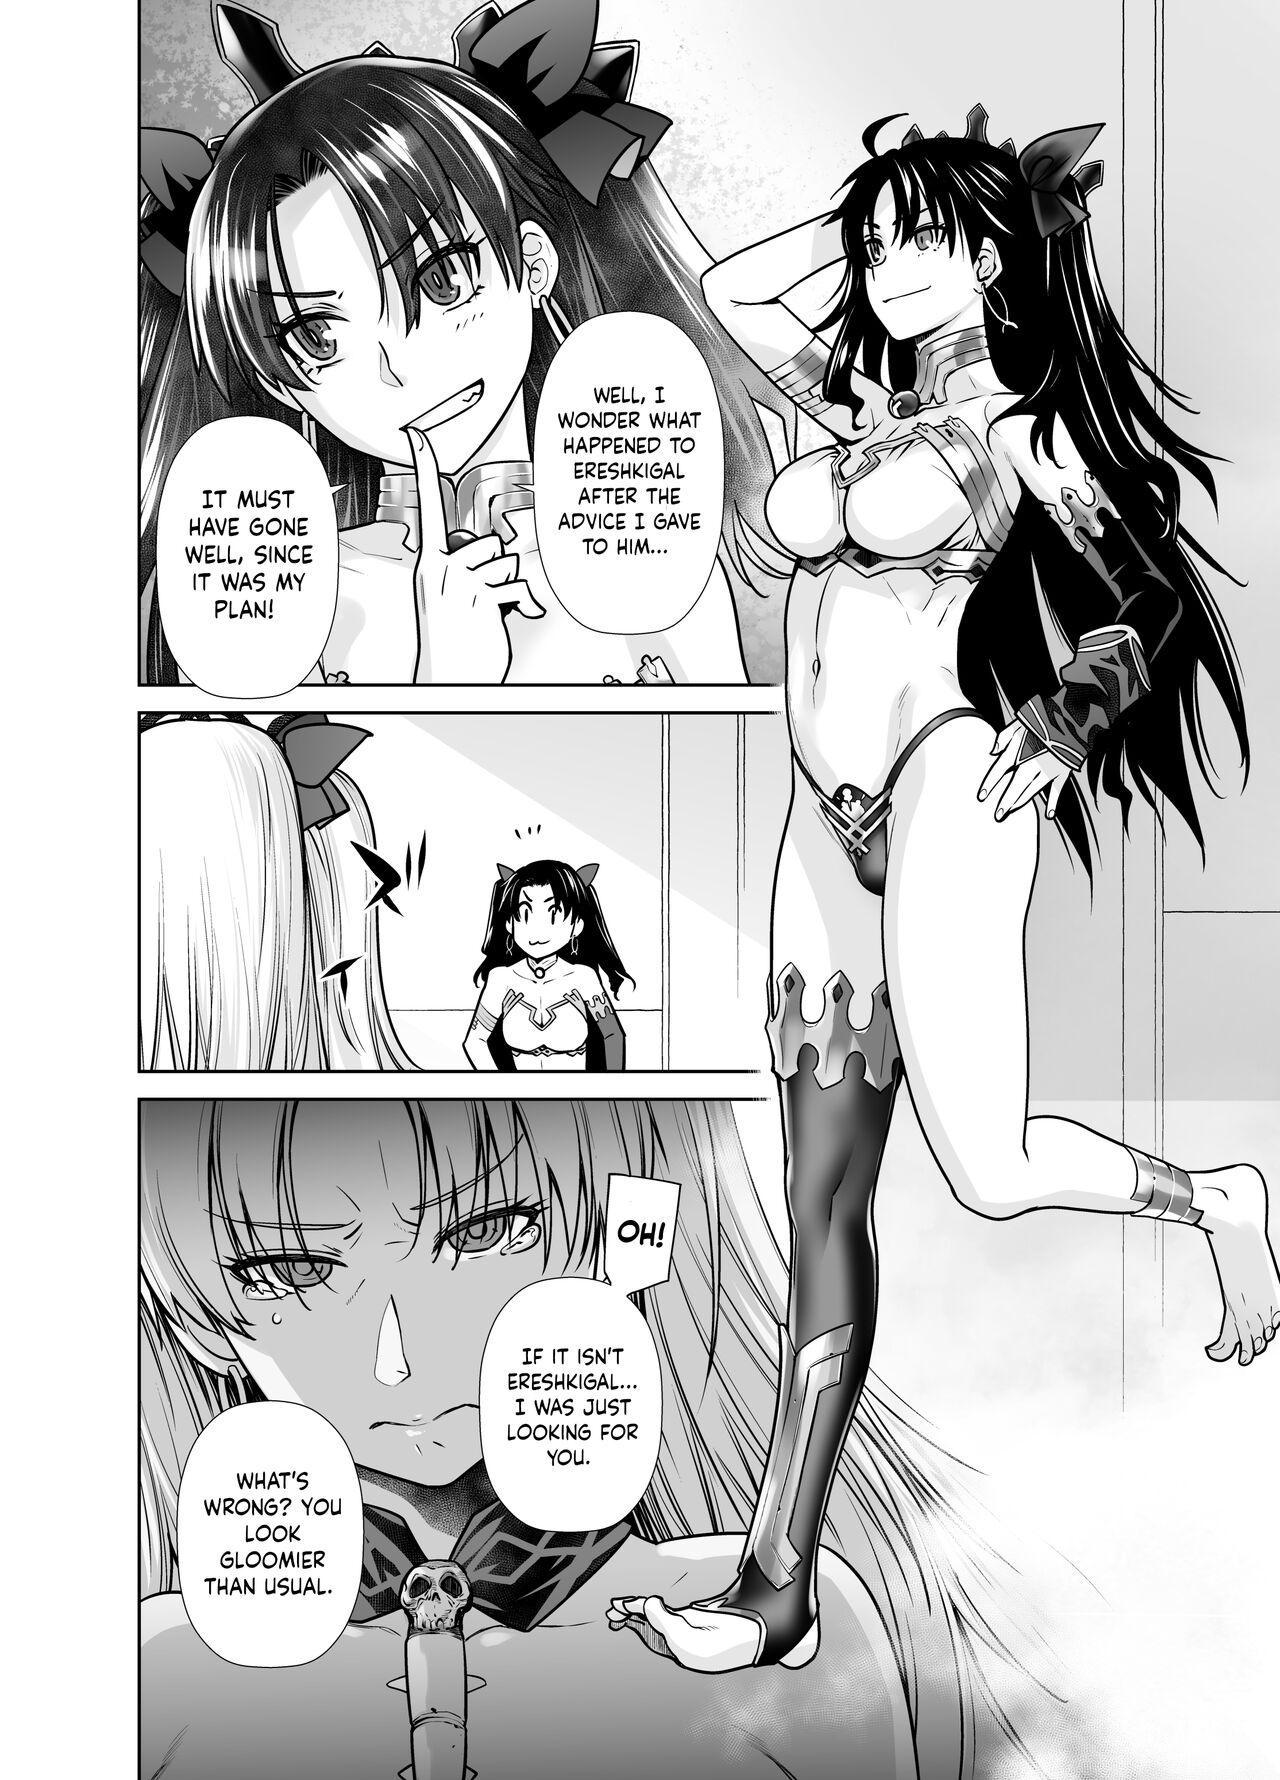 Amante HEAVEN'S DRIVE 10 - Fate grand order Pervert - Page 5